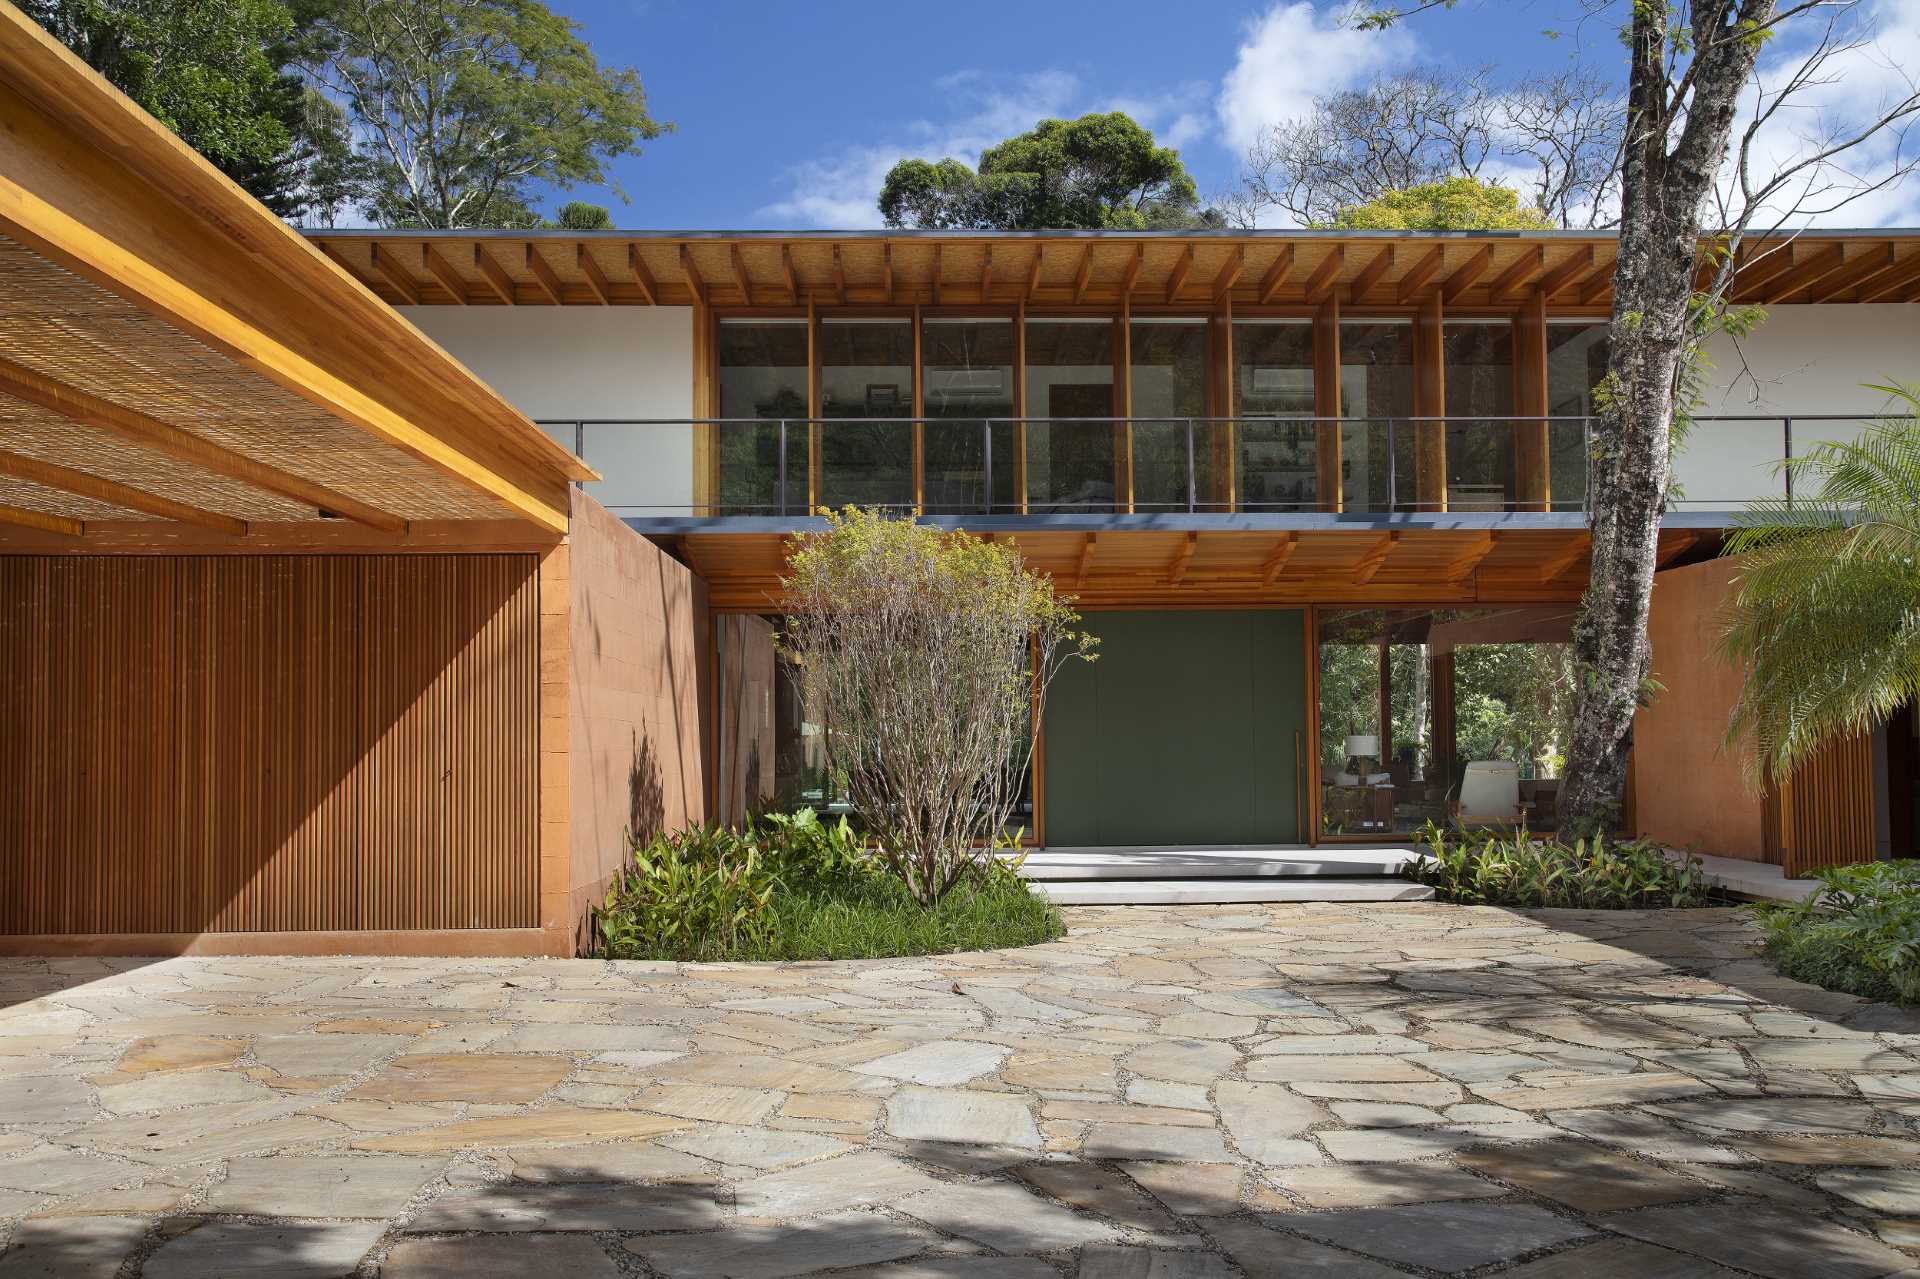 A modern house in Brazil has its post and beam structure on display throughout the interior and exterior.